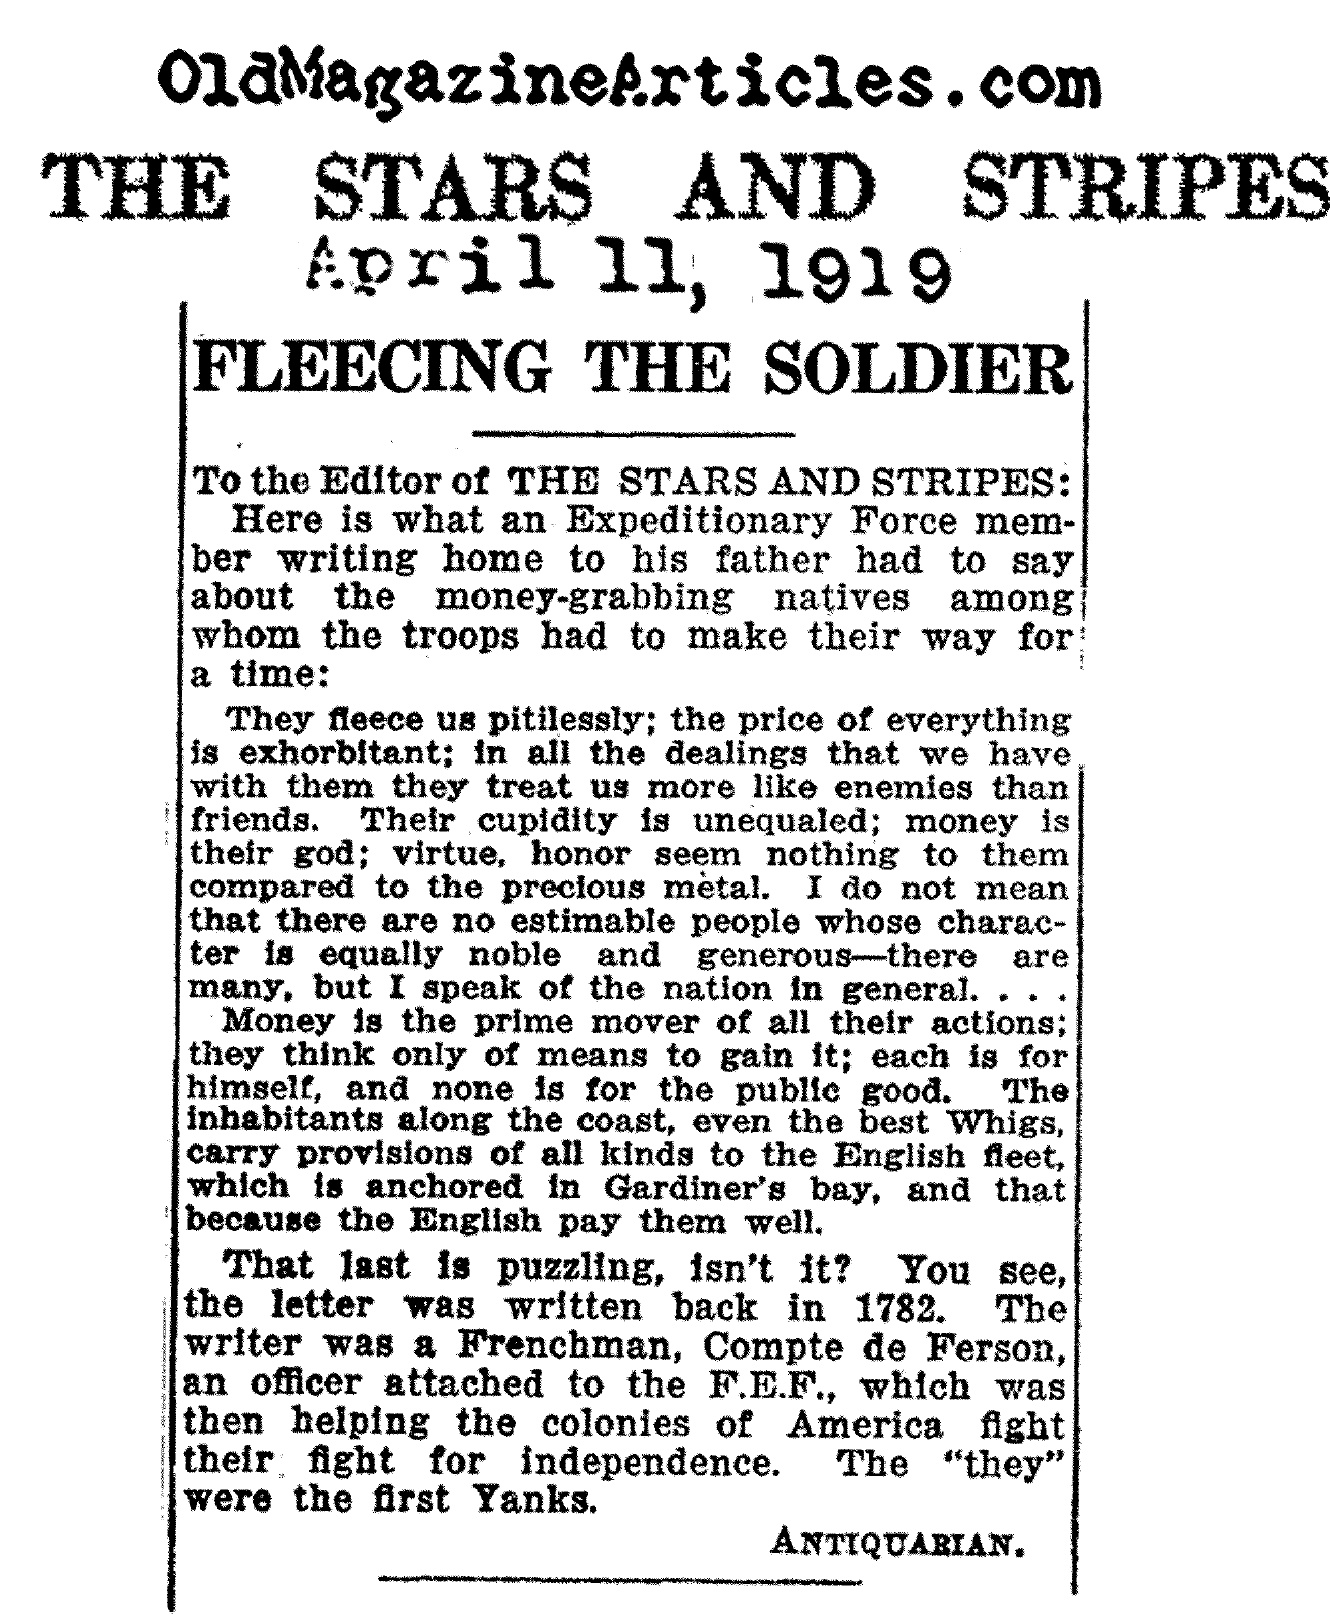 The Fleecing of Liberators  (The Stars and Stripes, 1919)